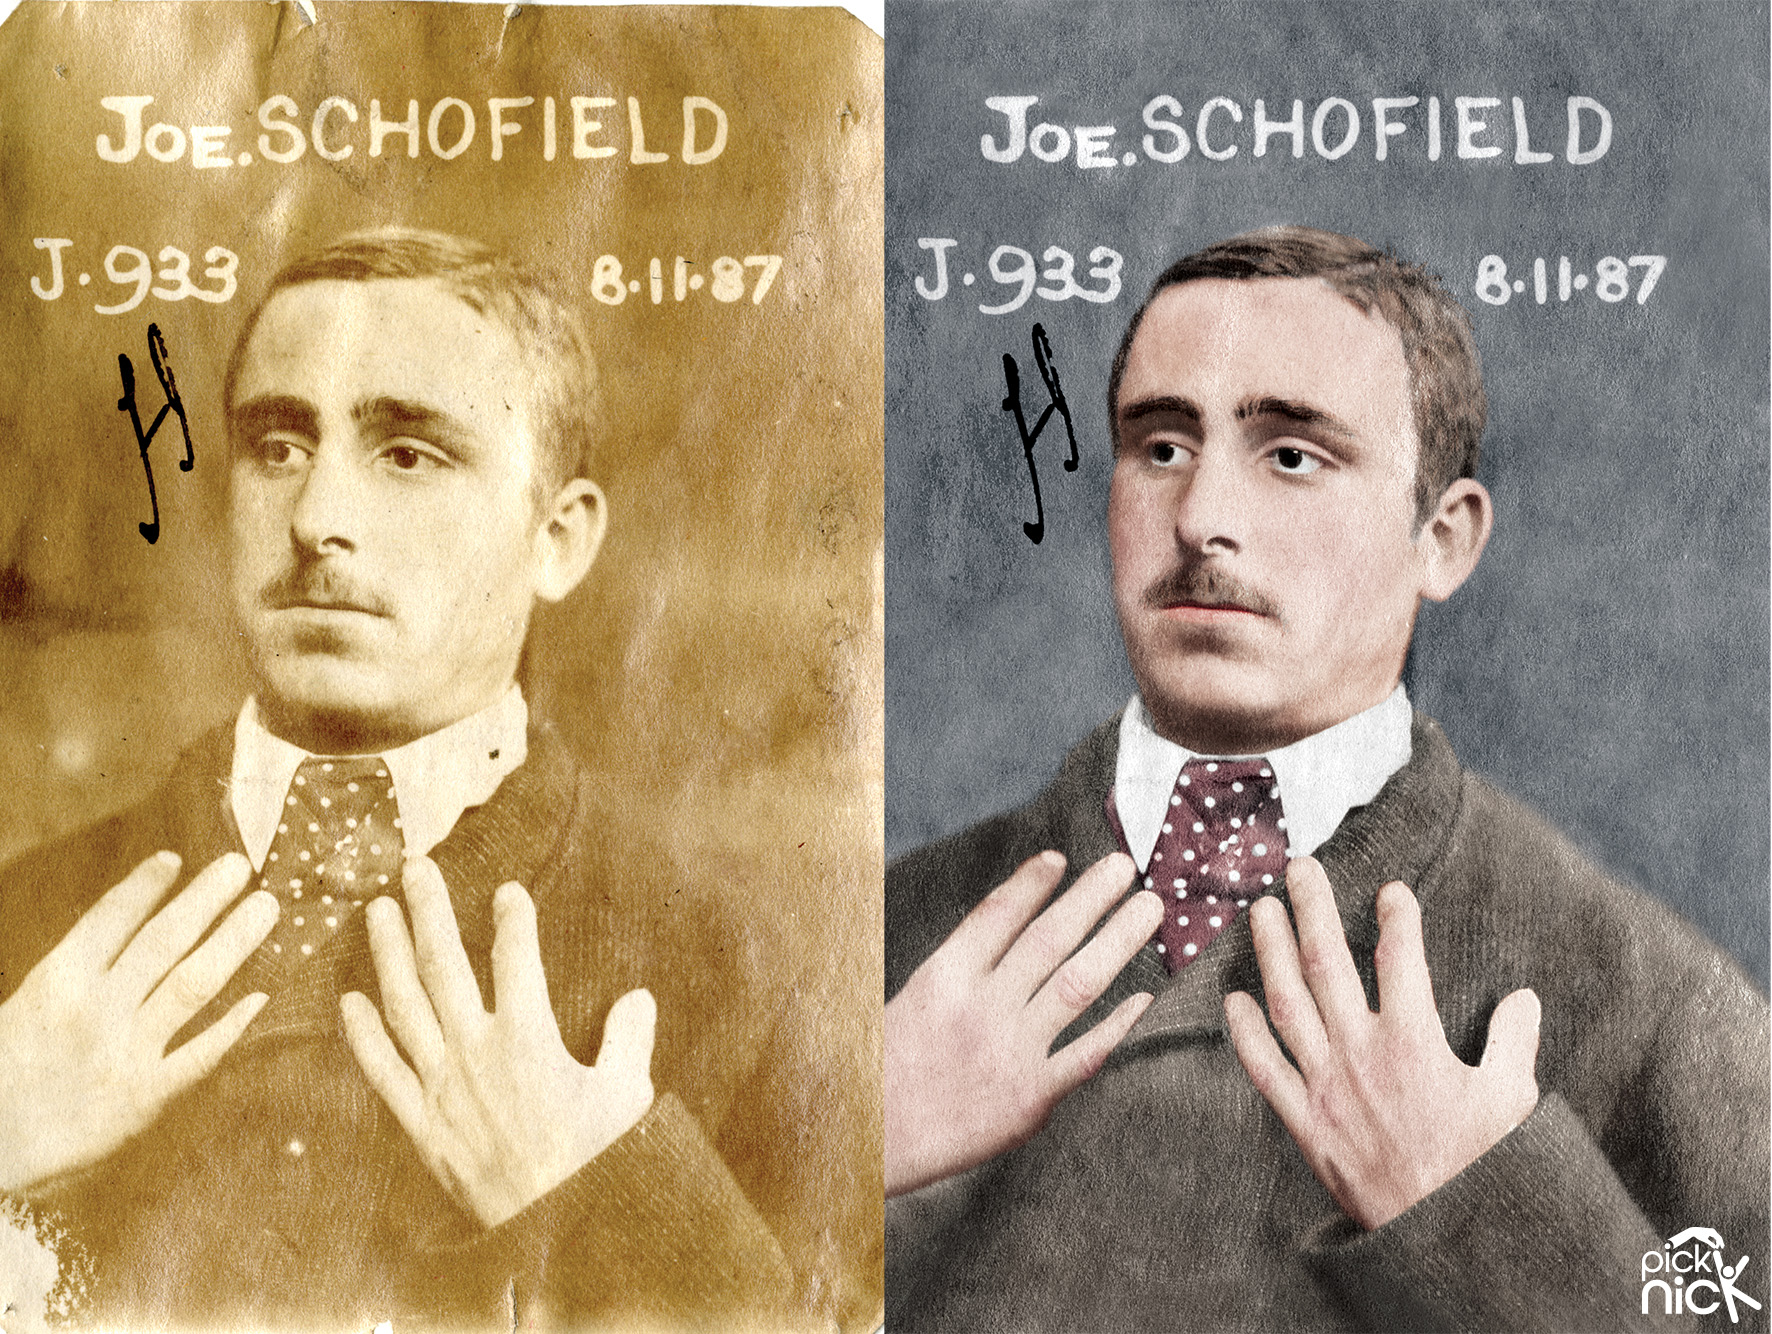 Joe Schofield - Colourised prisoner photos showing before and after